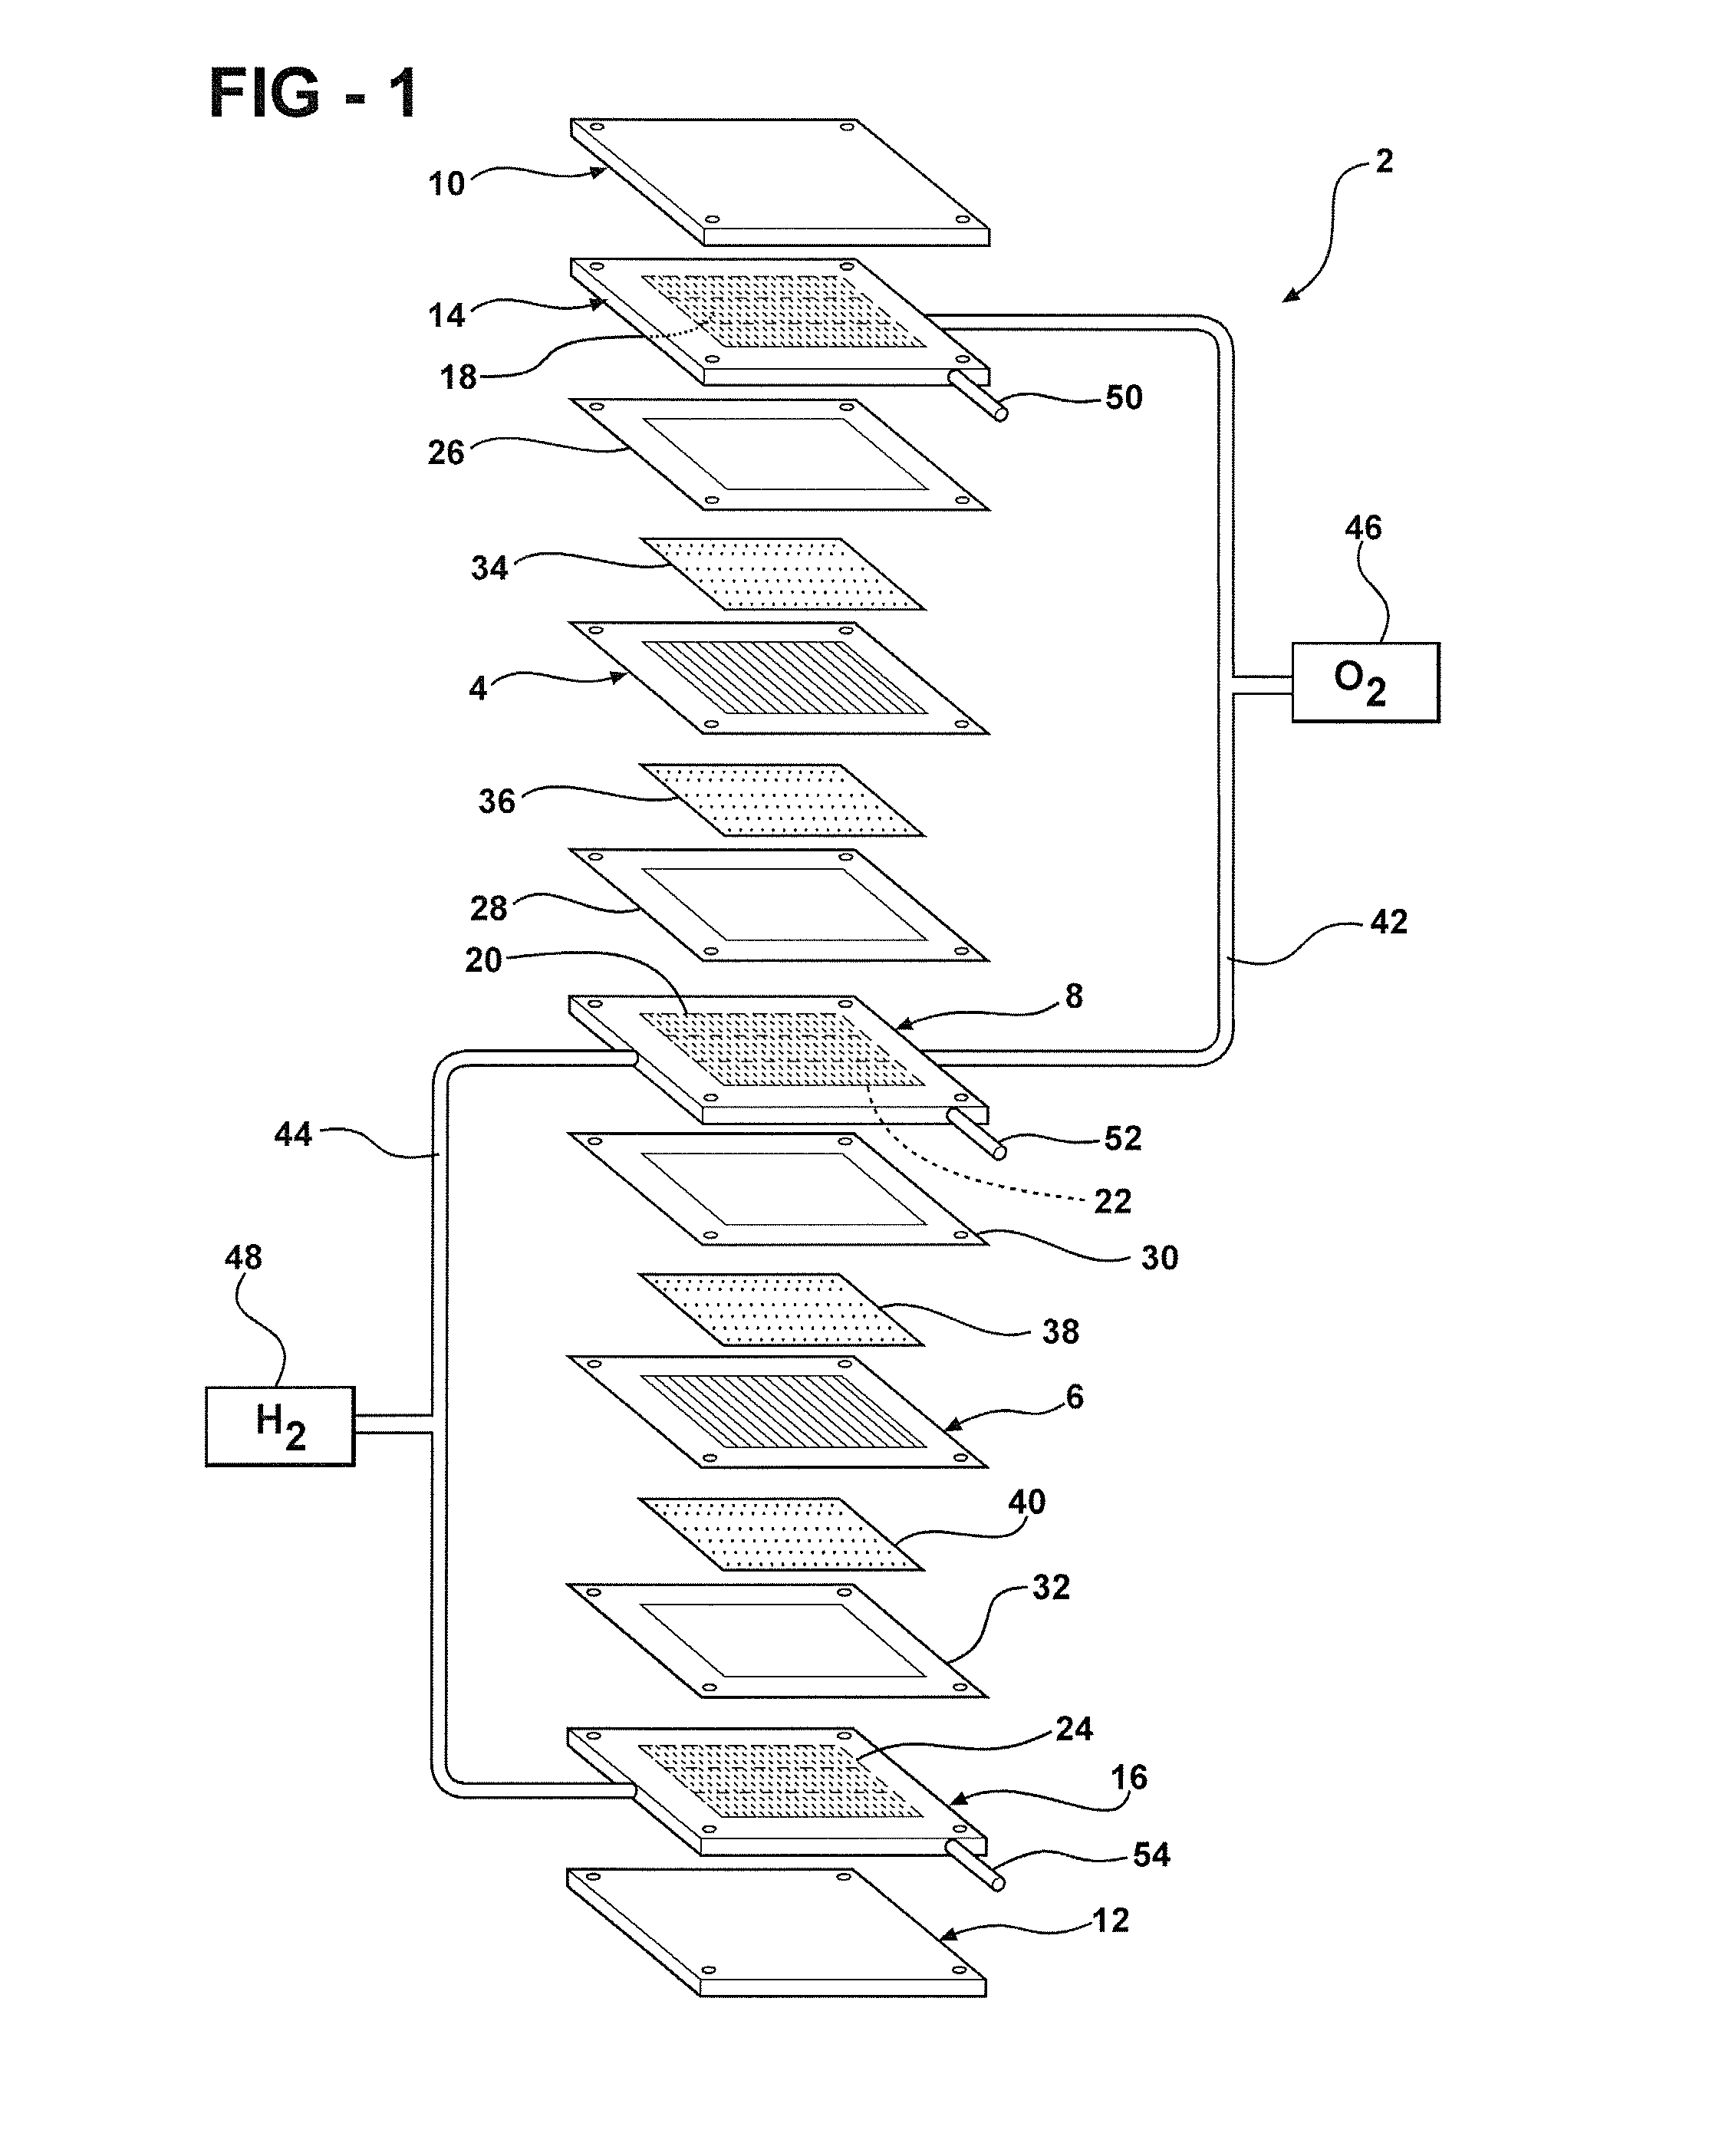 Fuel cell compression retention system using compliant strapping